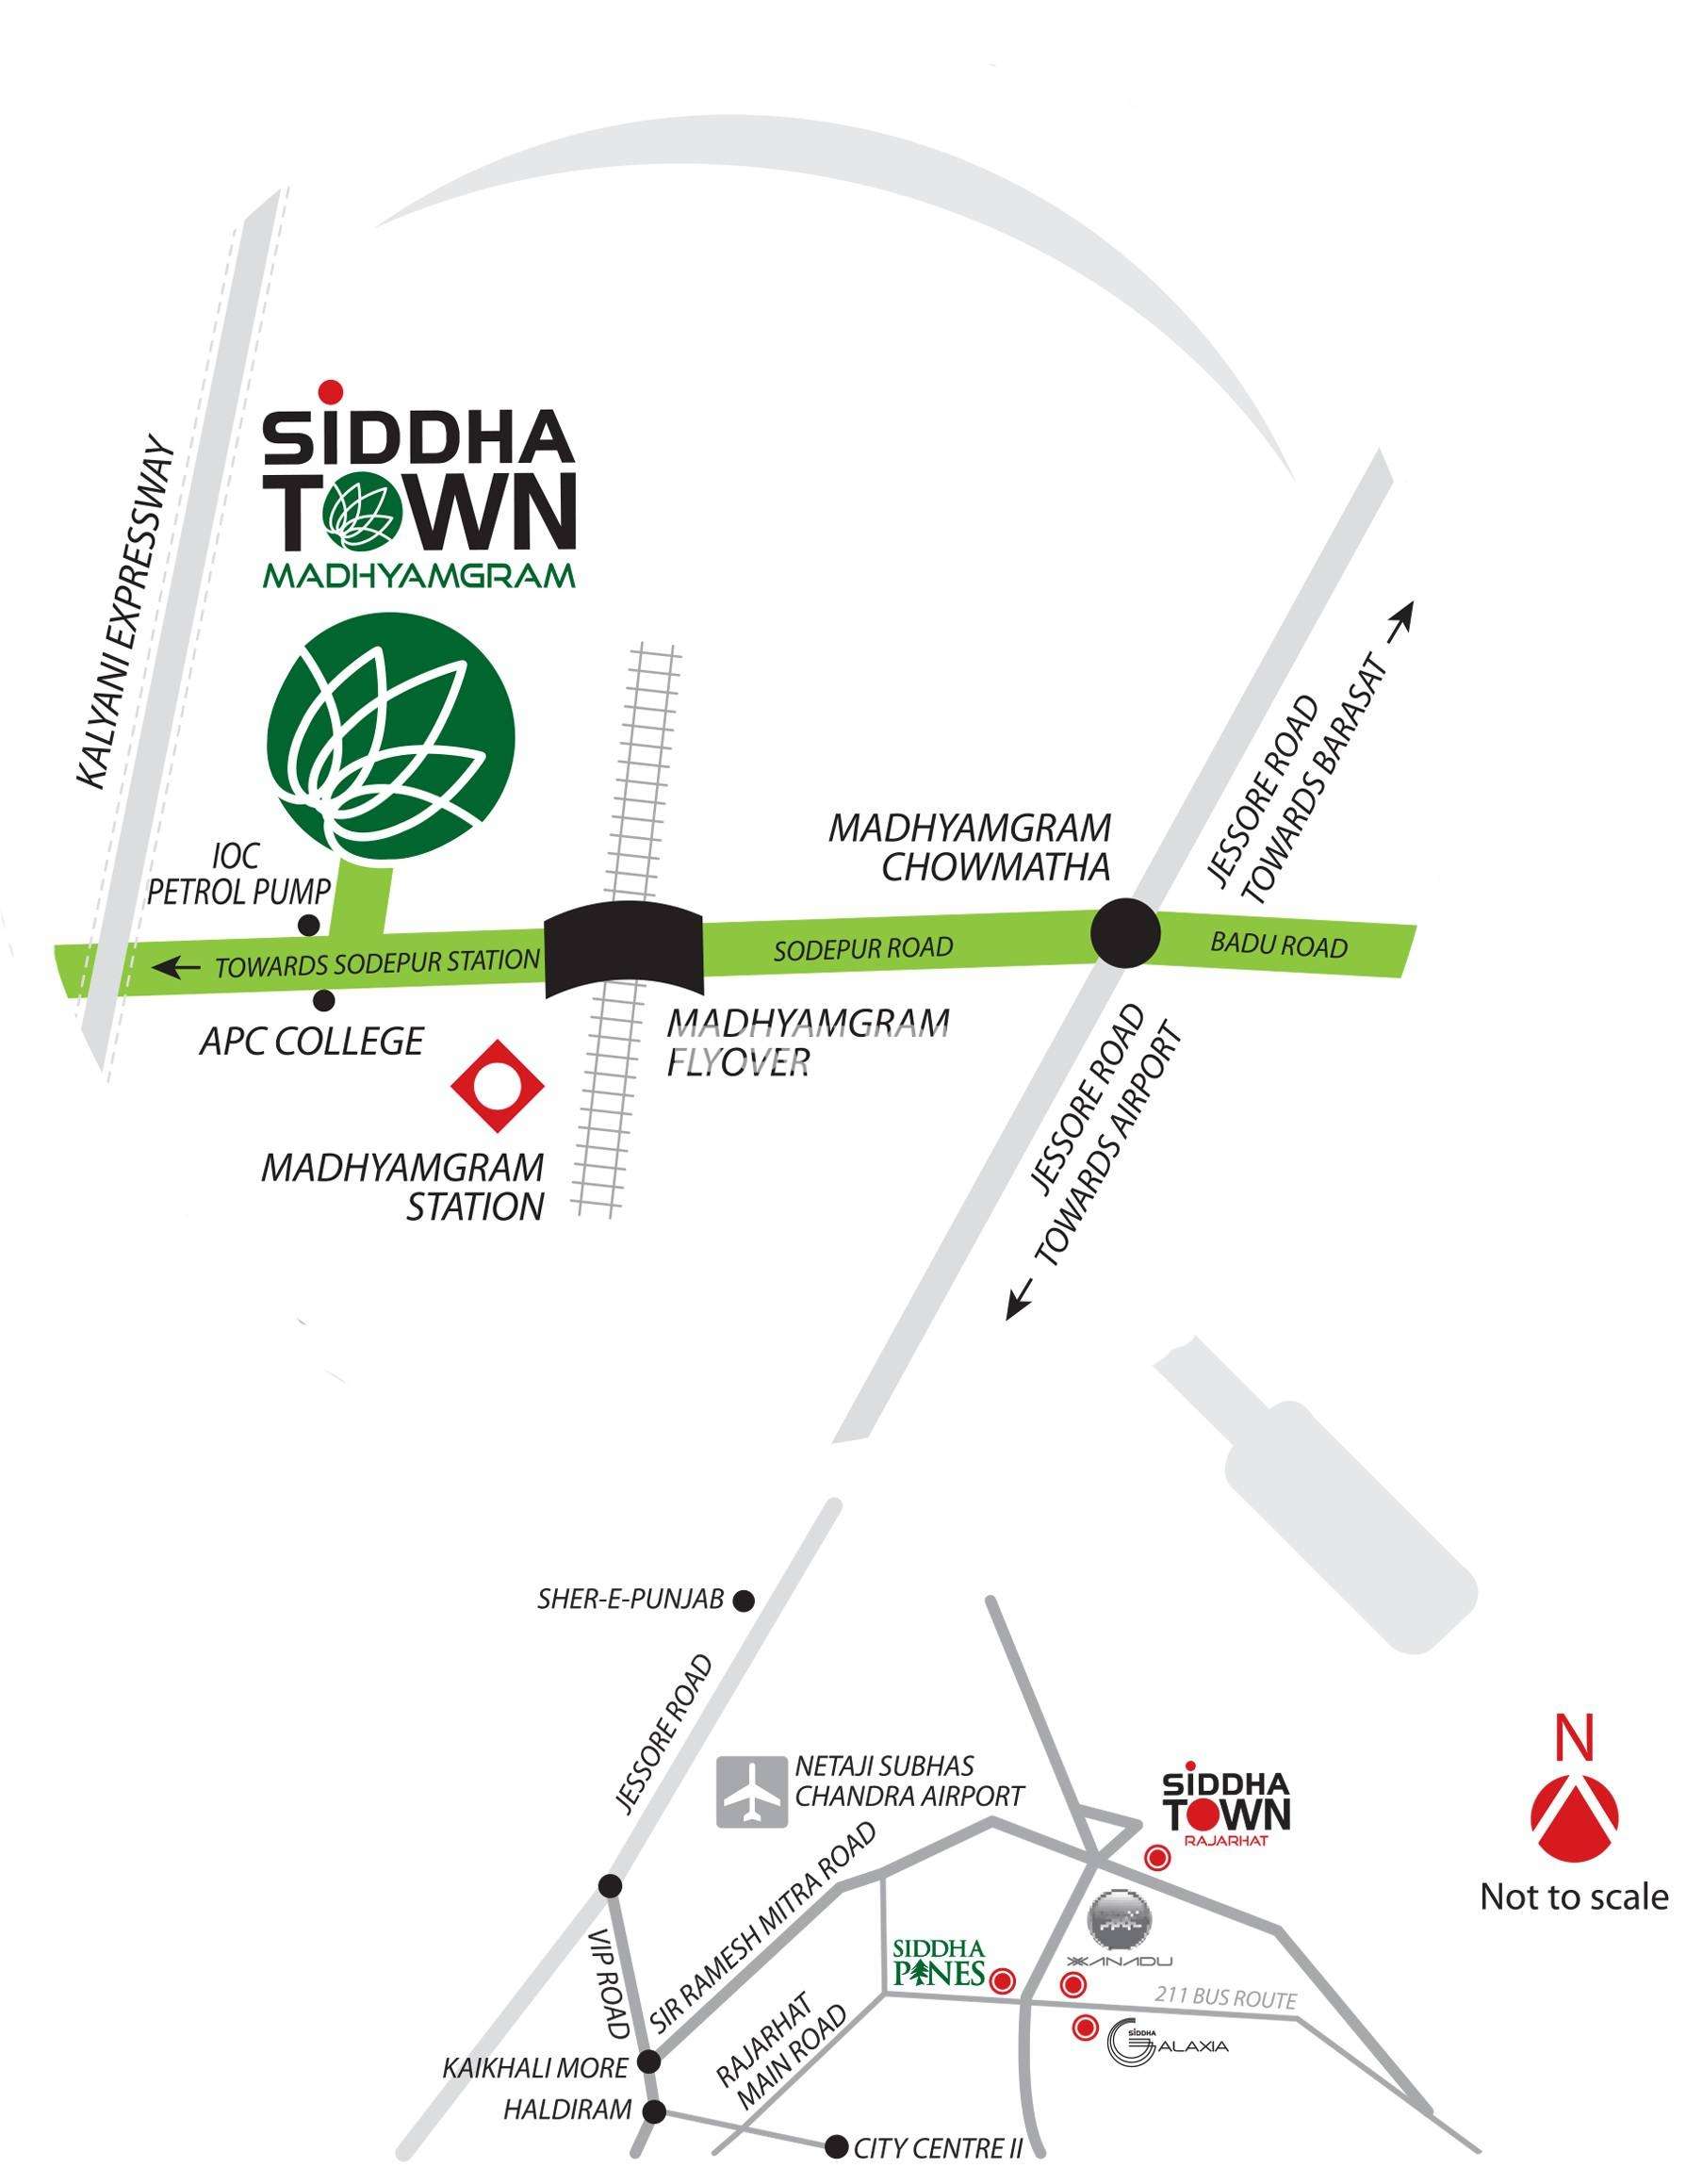 siddha town madhyamgram project location image1